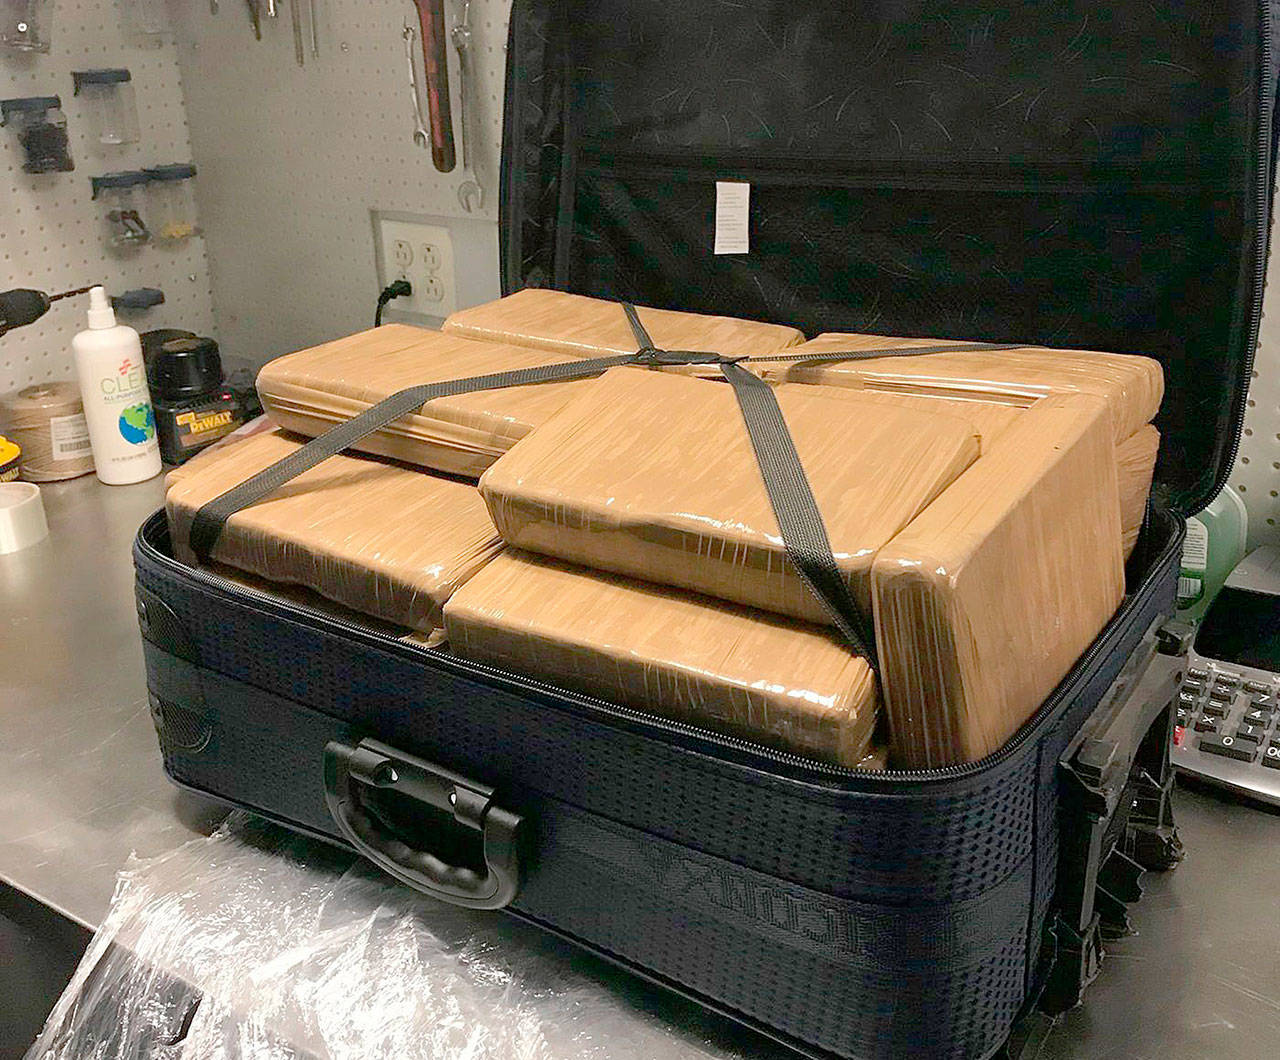 Drug dealer’s worst nightmare — Suitcase full of $1.3 million worth of cocaine seized at Kennedy Airport